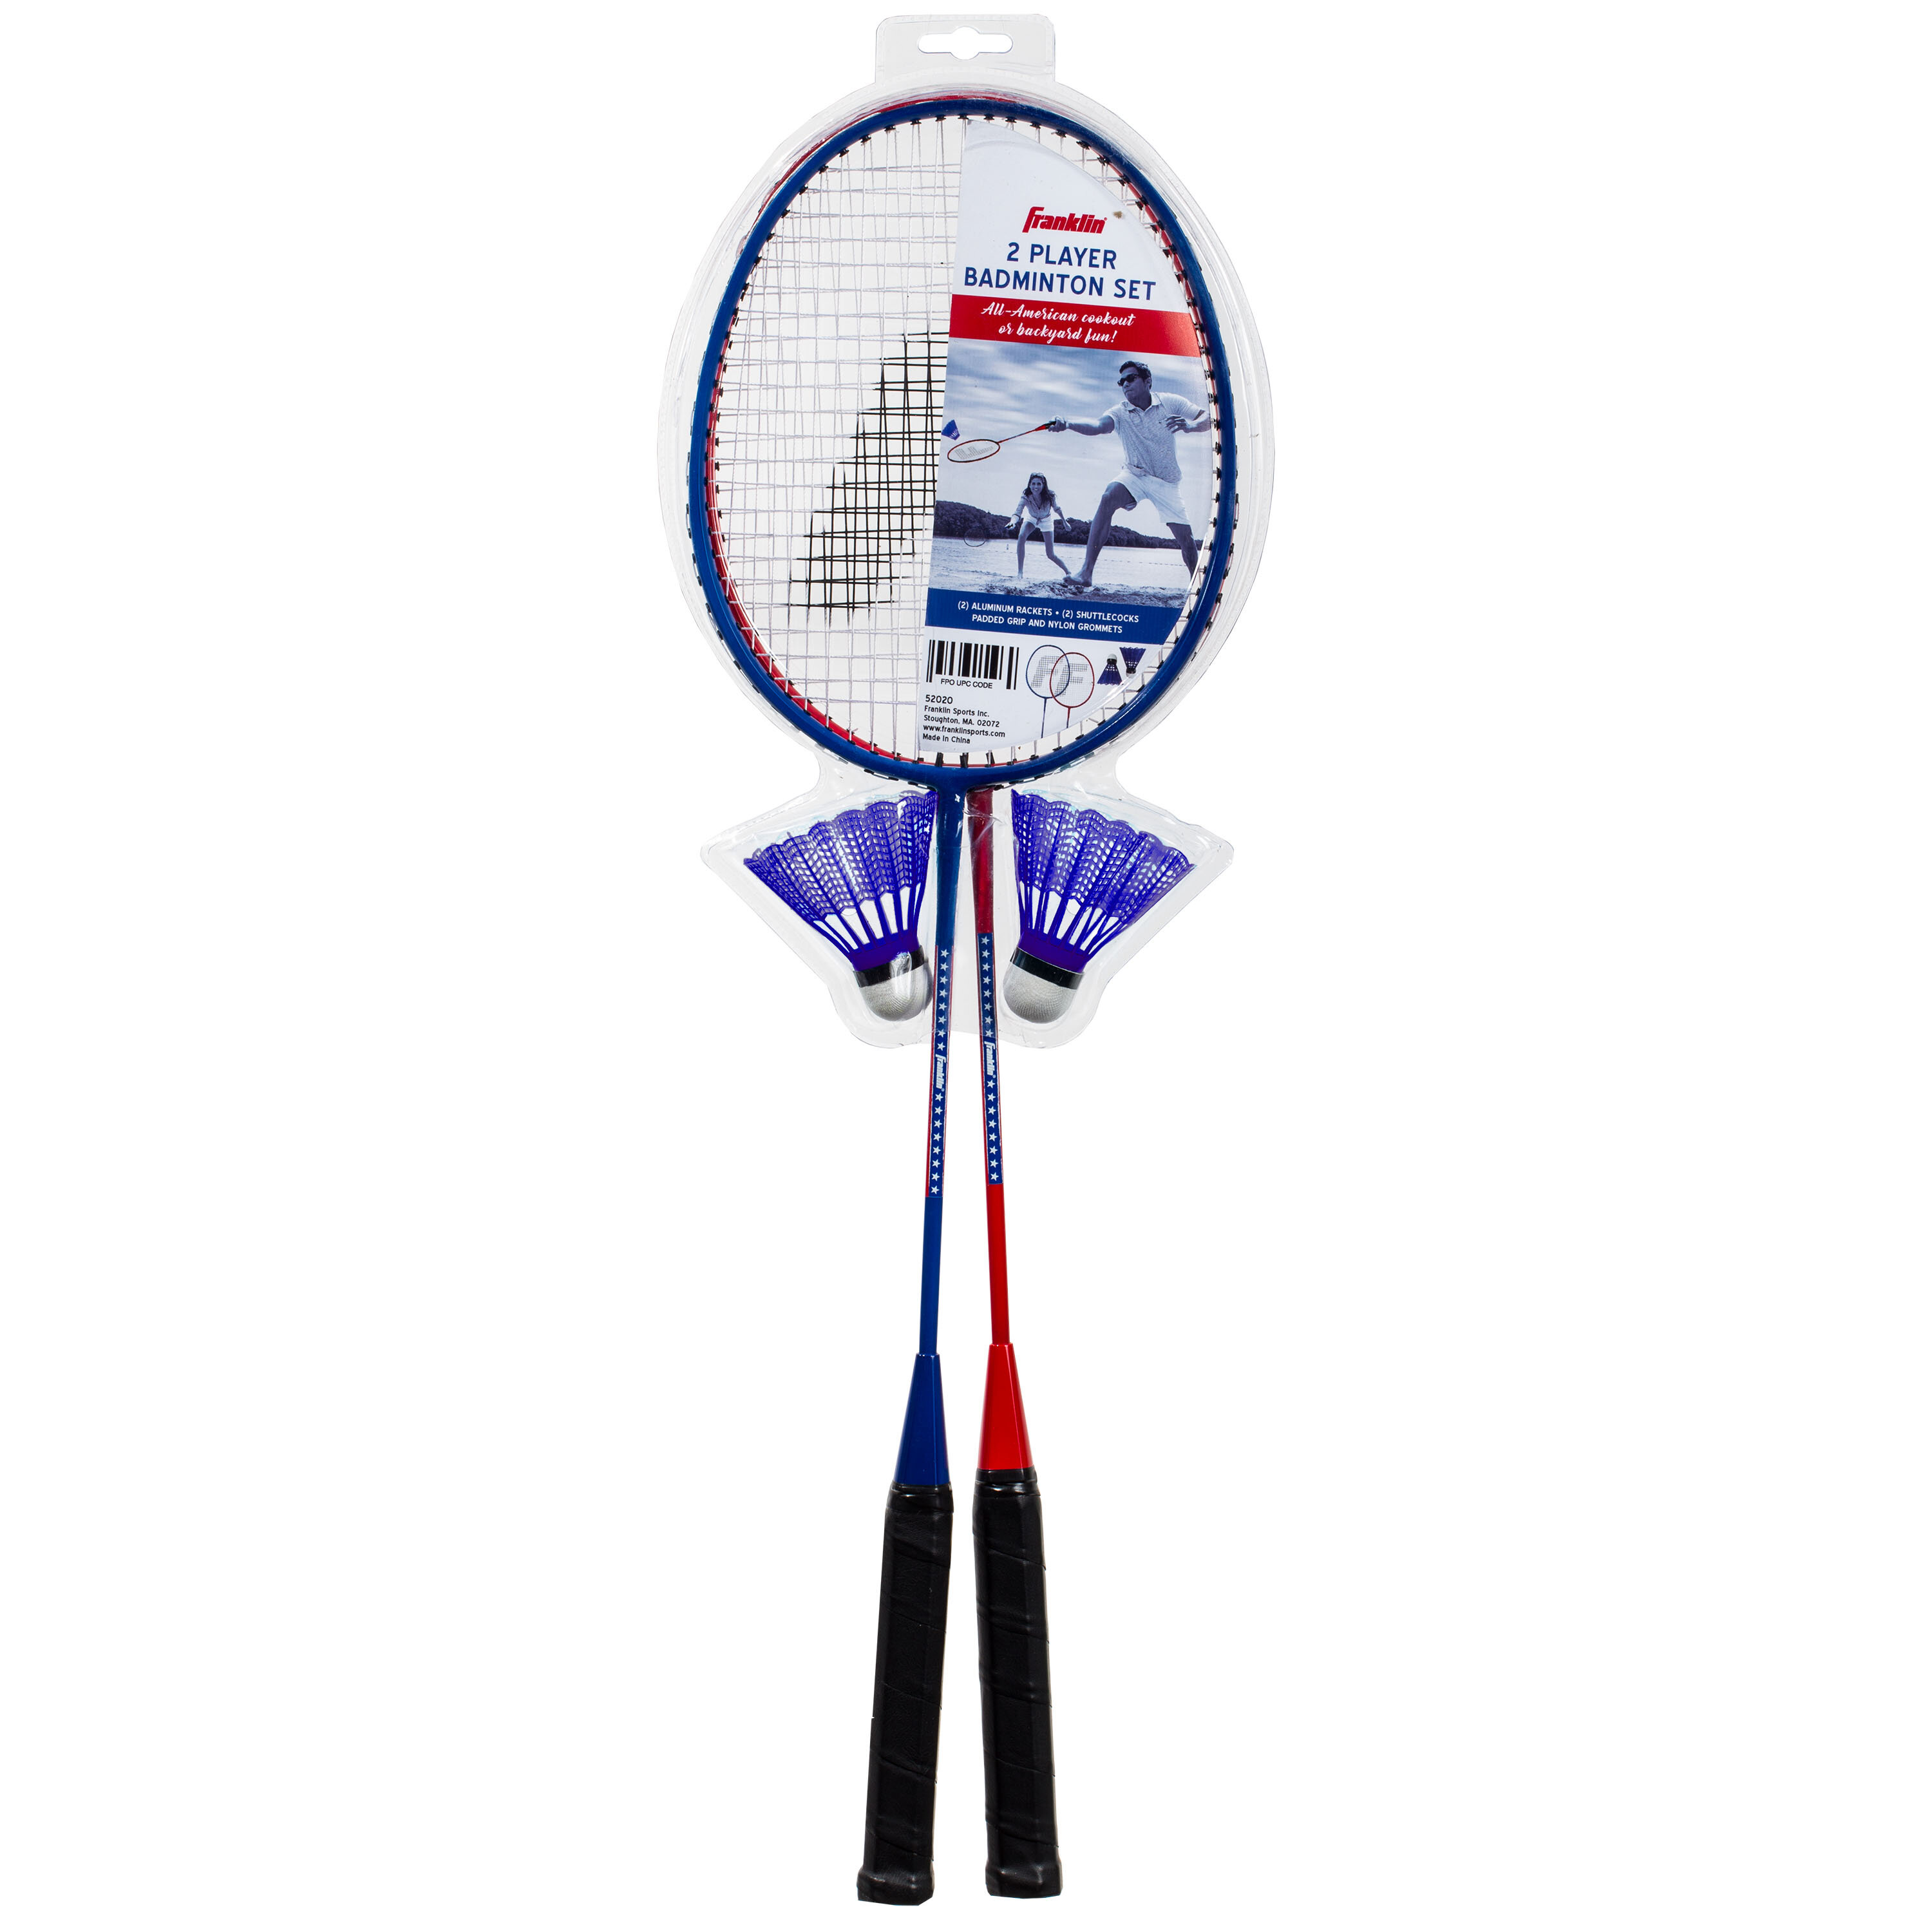 Wilson 4 Player Badminton Set BRAND NEW FREE DELIVERY 